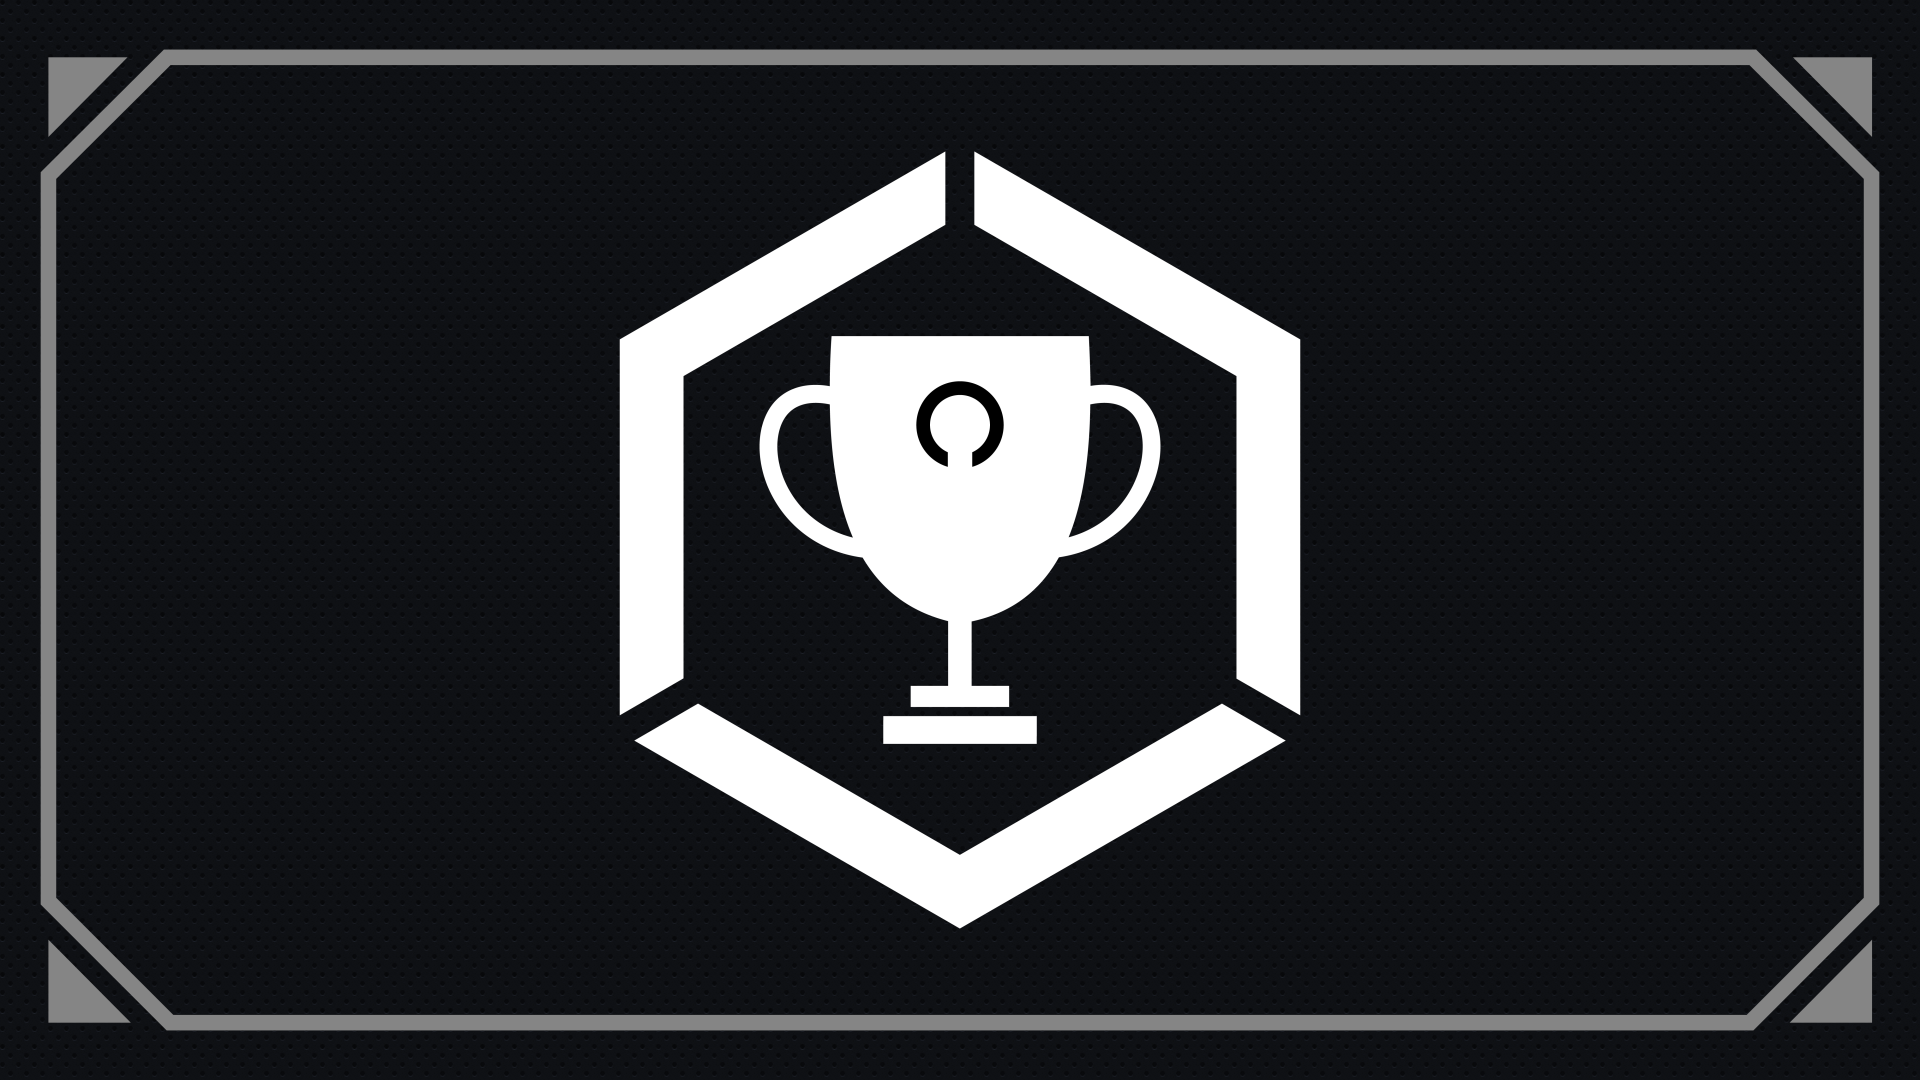 Icon for Bronze Trophy